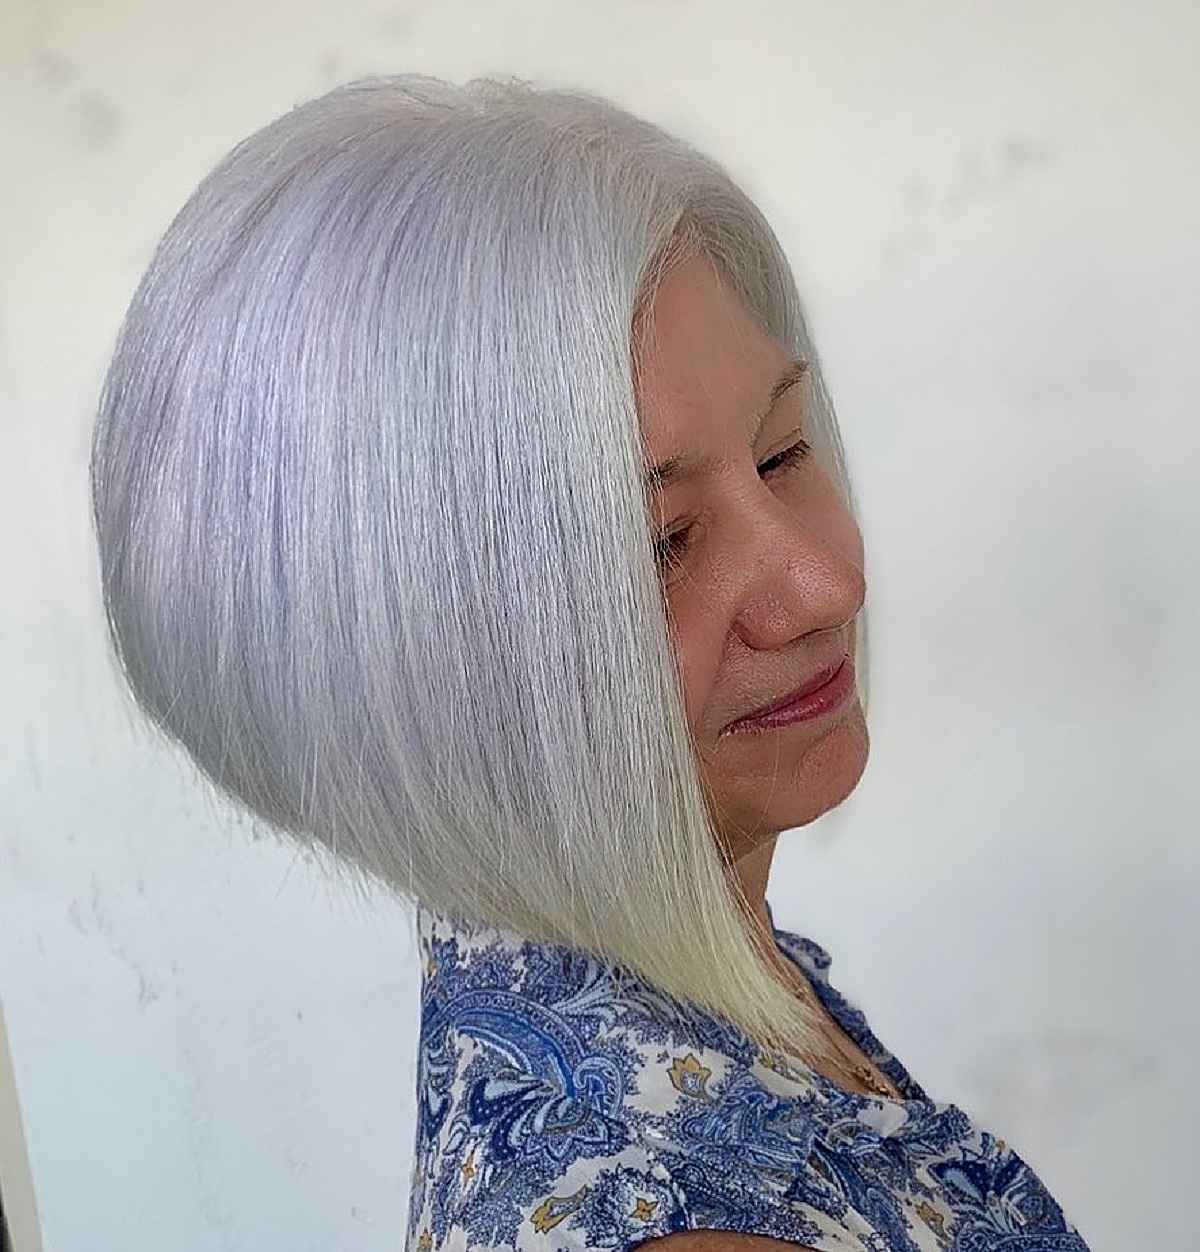 Younger-Looking A-Line Bob for Women 60 and Older